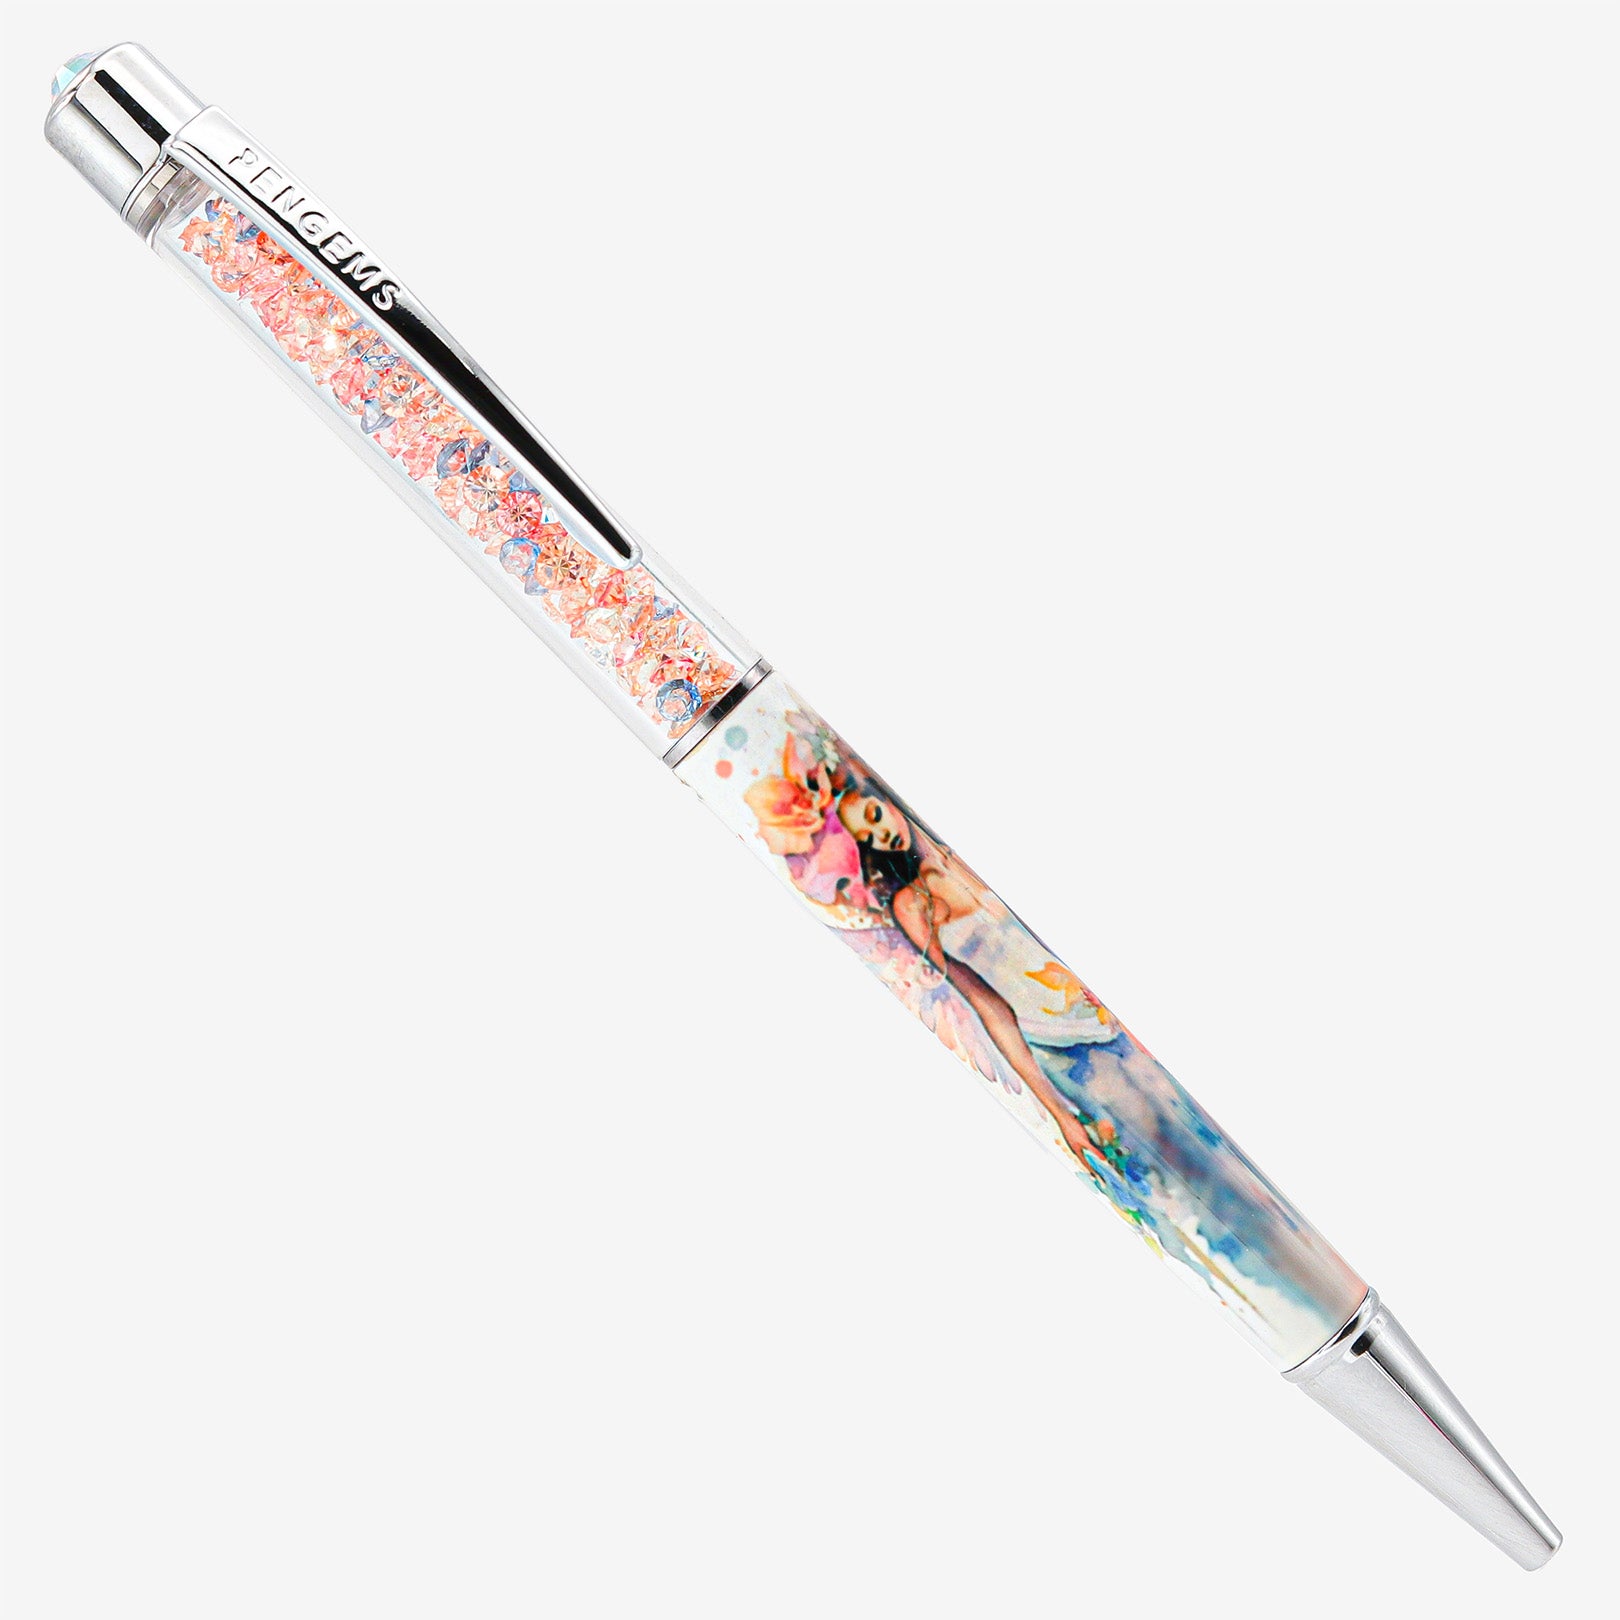 Kenna Pixie Dust Highland Meadow Collection Crystal Pen